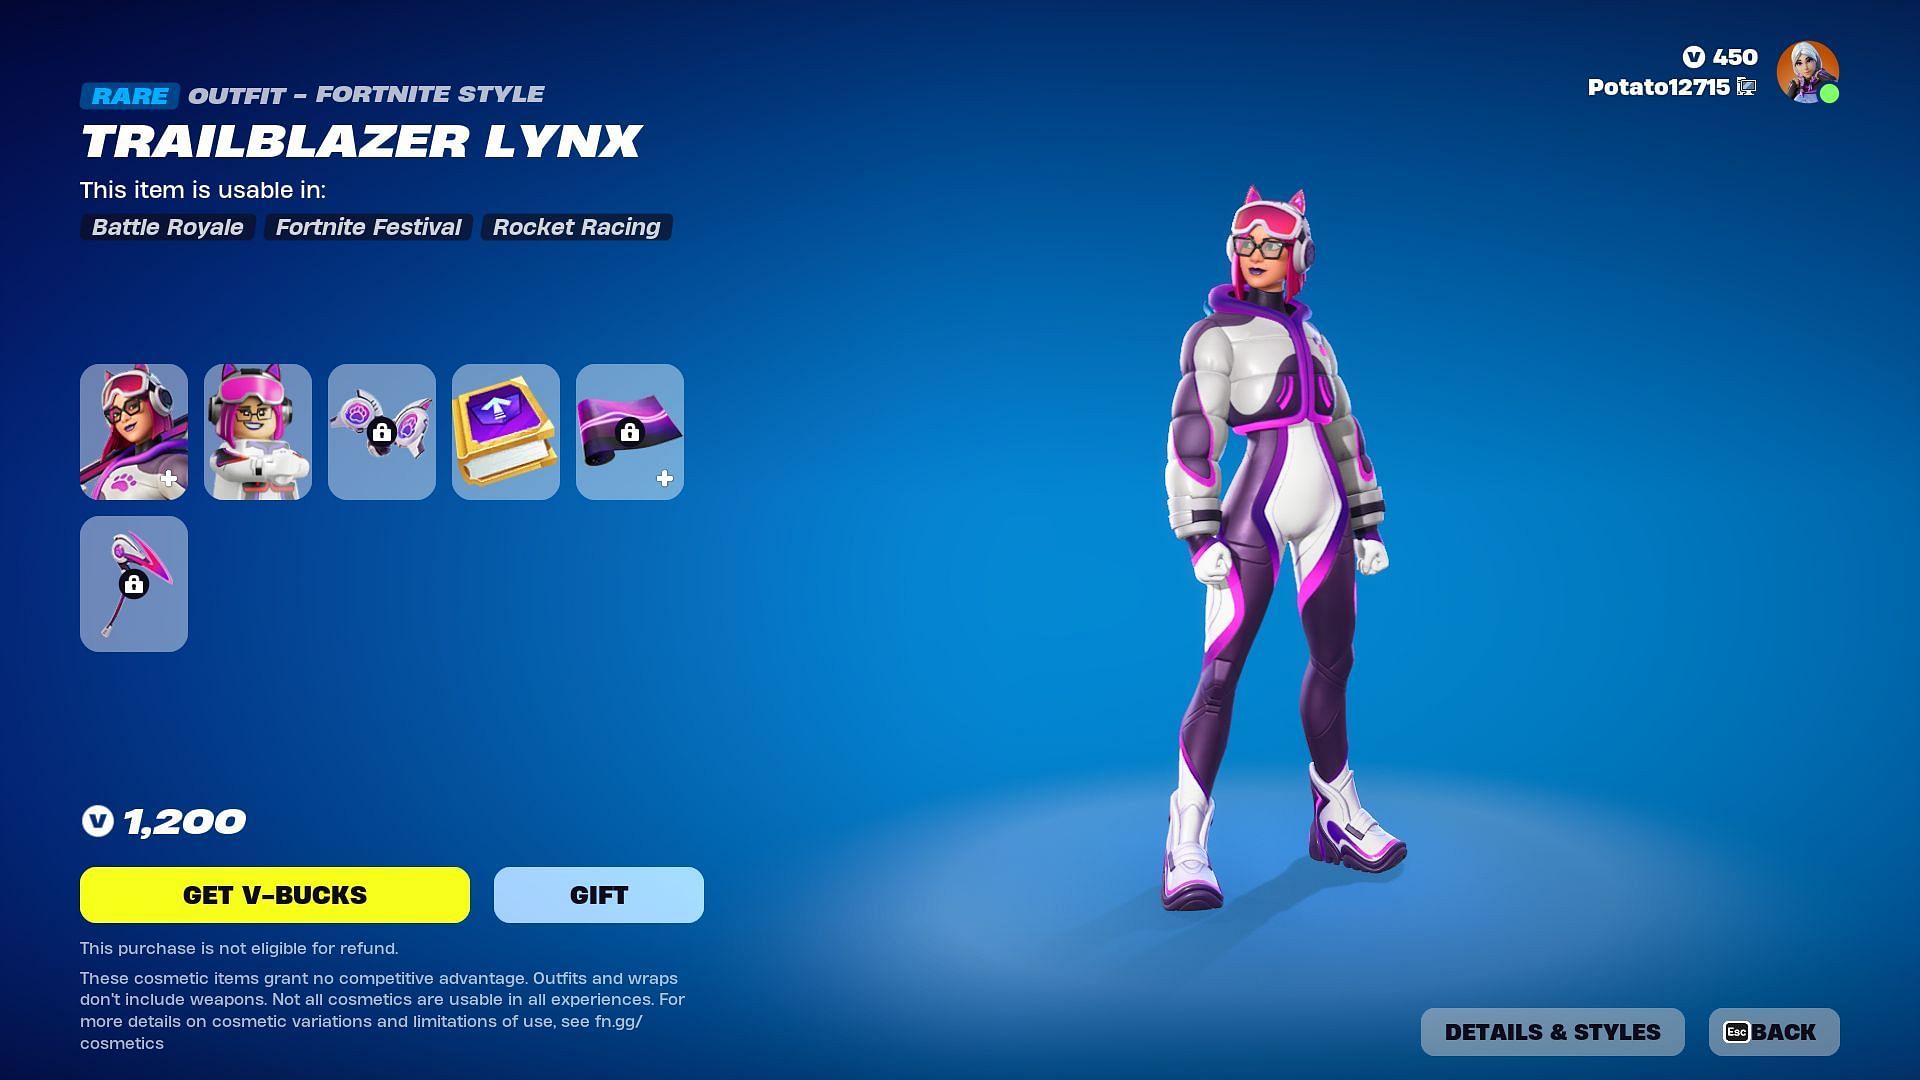 Trailblazer Lynx Skin is currently listed in the Item Shop (Image via Epic Games/Fortnite)